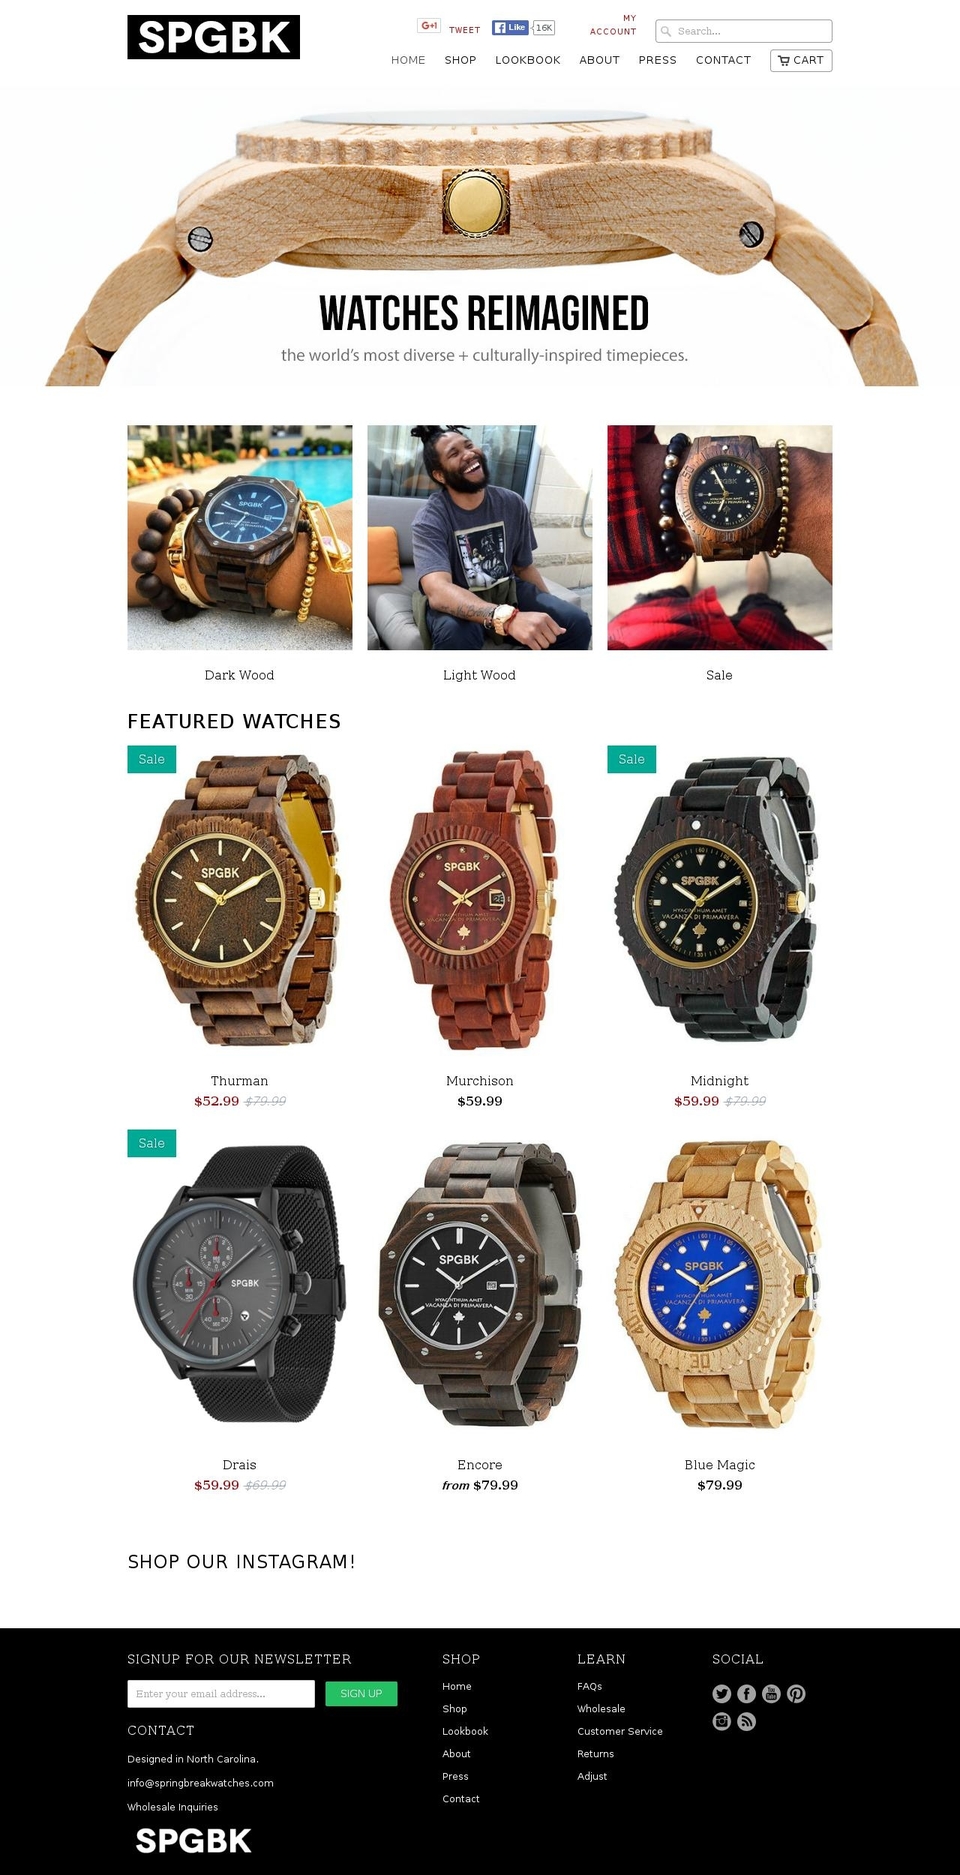 Pipeline Shopify theme site example springbreakwatches.com